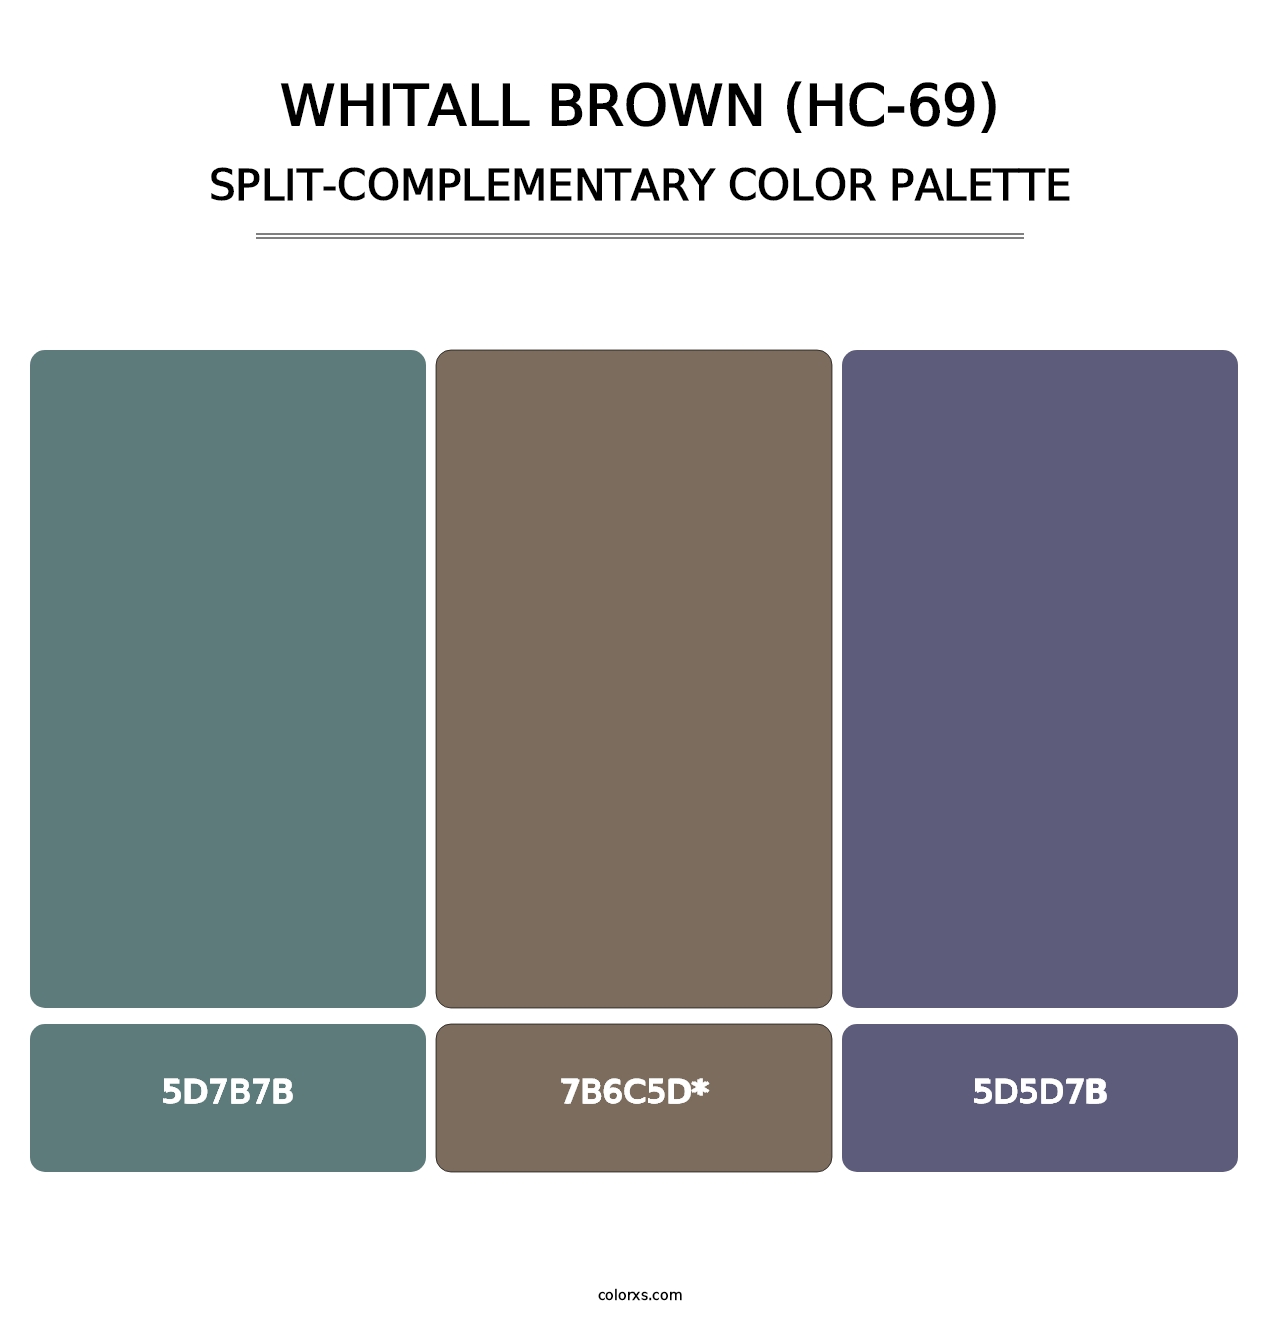 Whitall Brown (HC-69) - Split-Complementary Color Palette